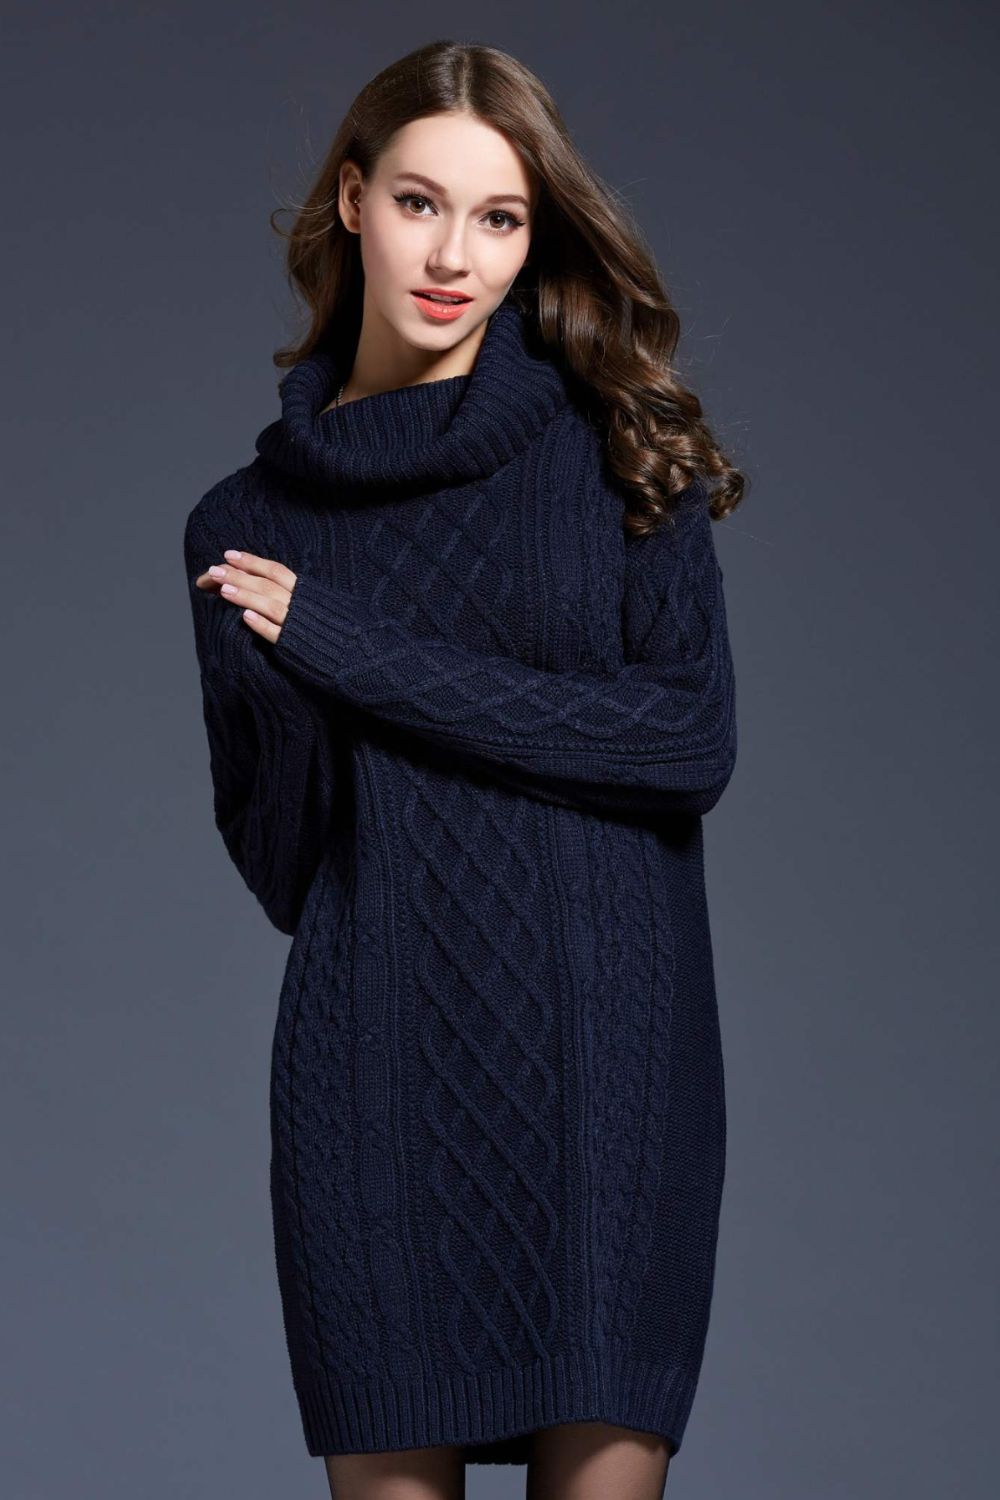 Full Size Mixed Knit Cowl Neck Dropped Shoulder Sweater Dress - Shah S. Sahota